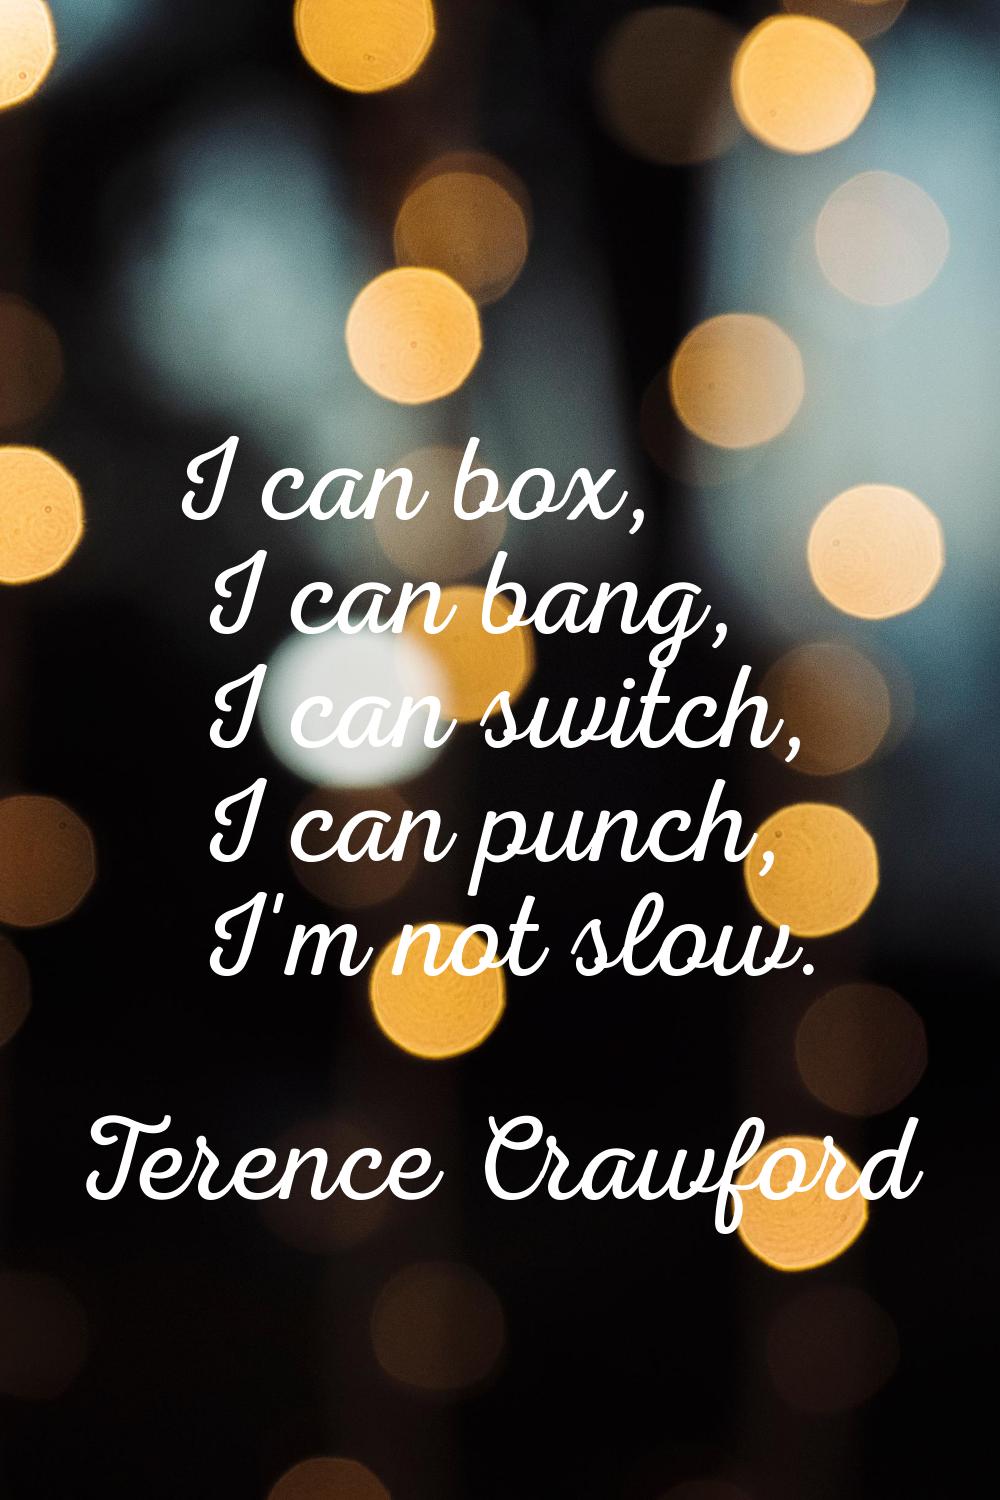 I can box, I can bang, I can switch, I can punch, I'm not slow.